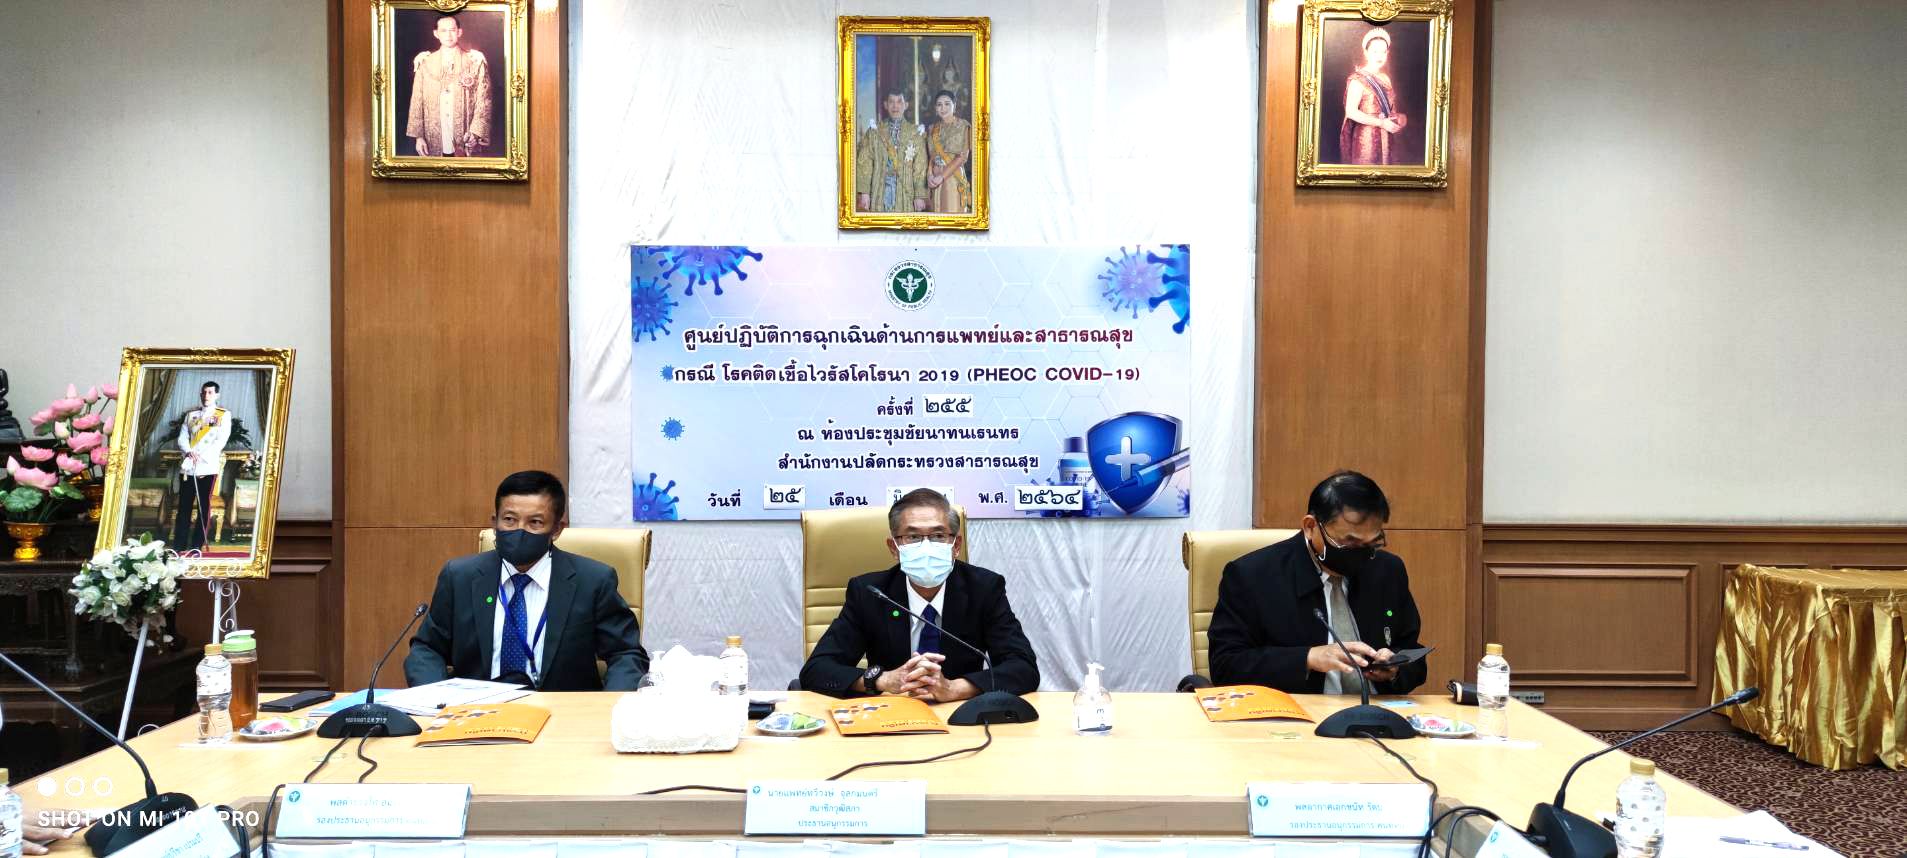 25 June 2021, at the Office of the Permanent Secretary of Ministry of Public Health, Nonthaburi Province 